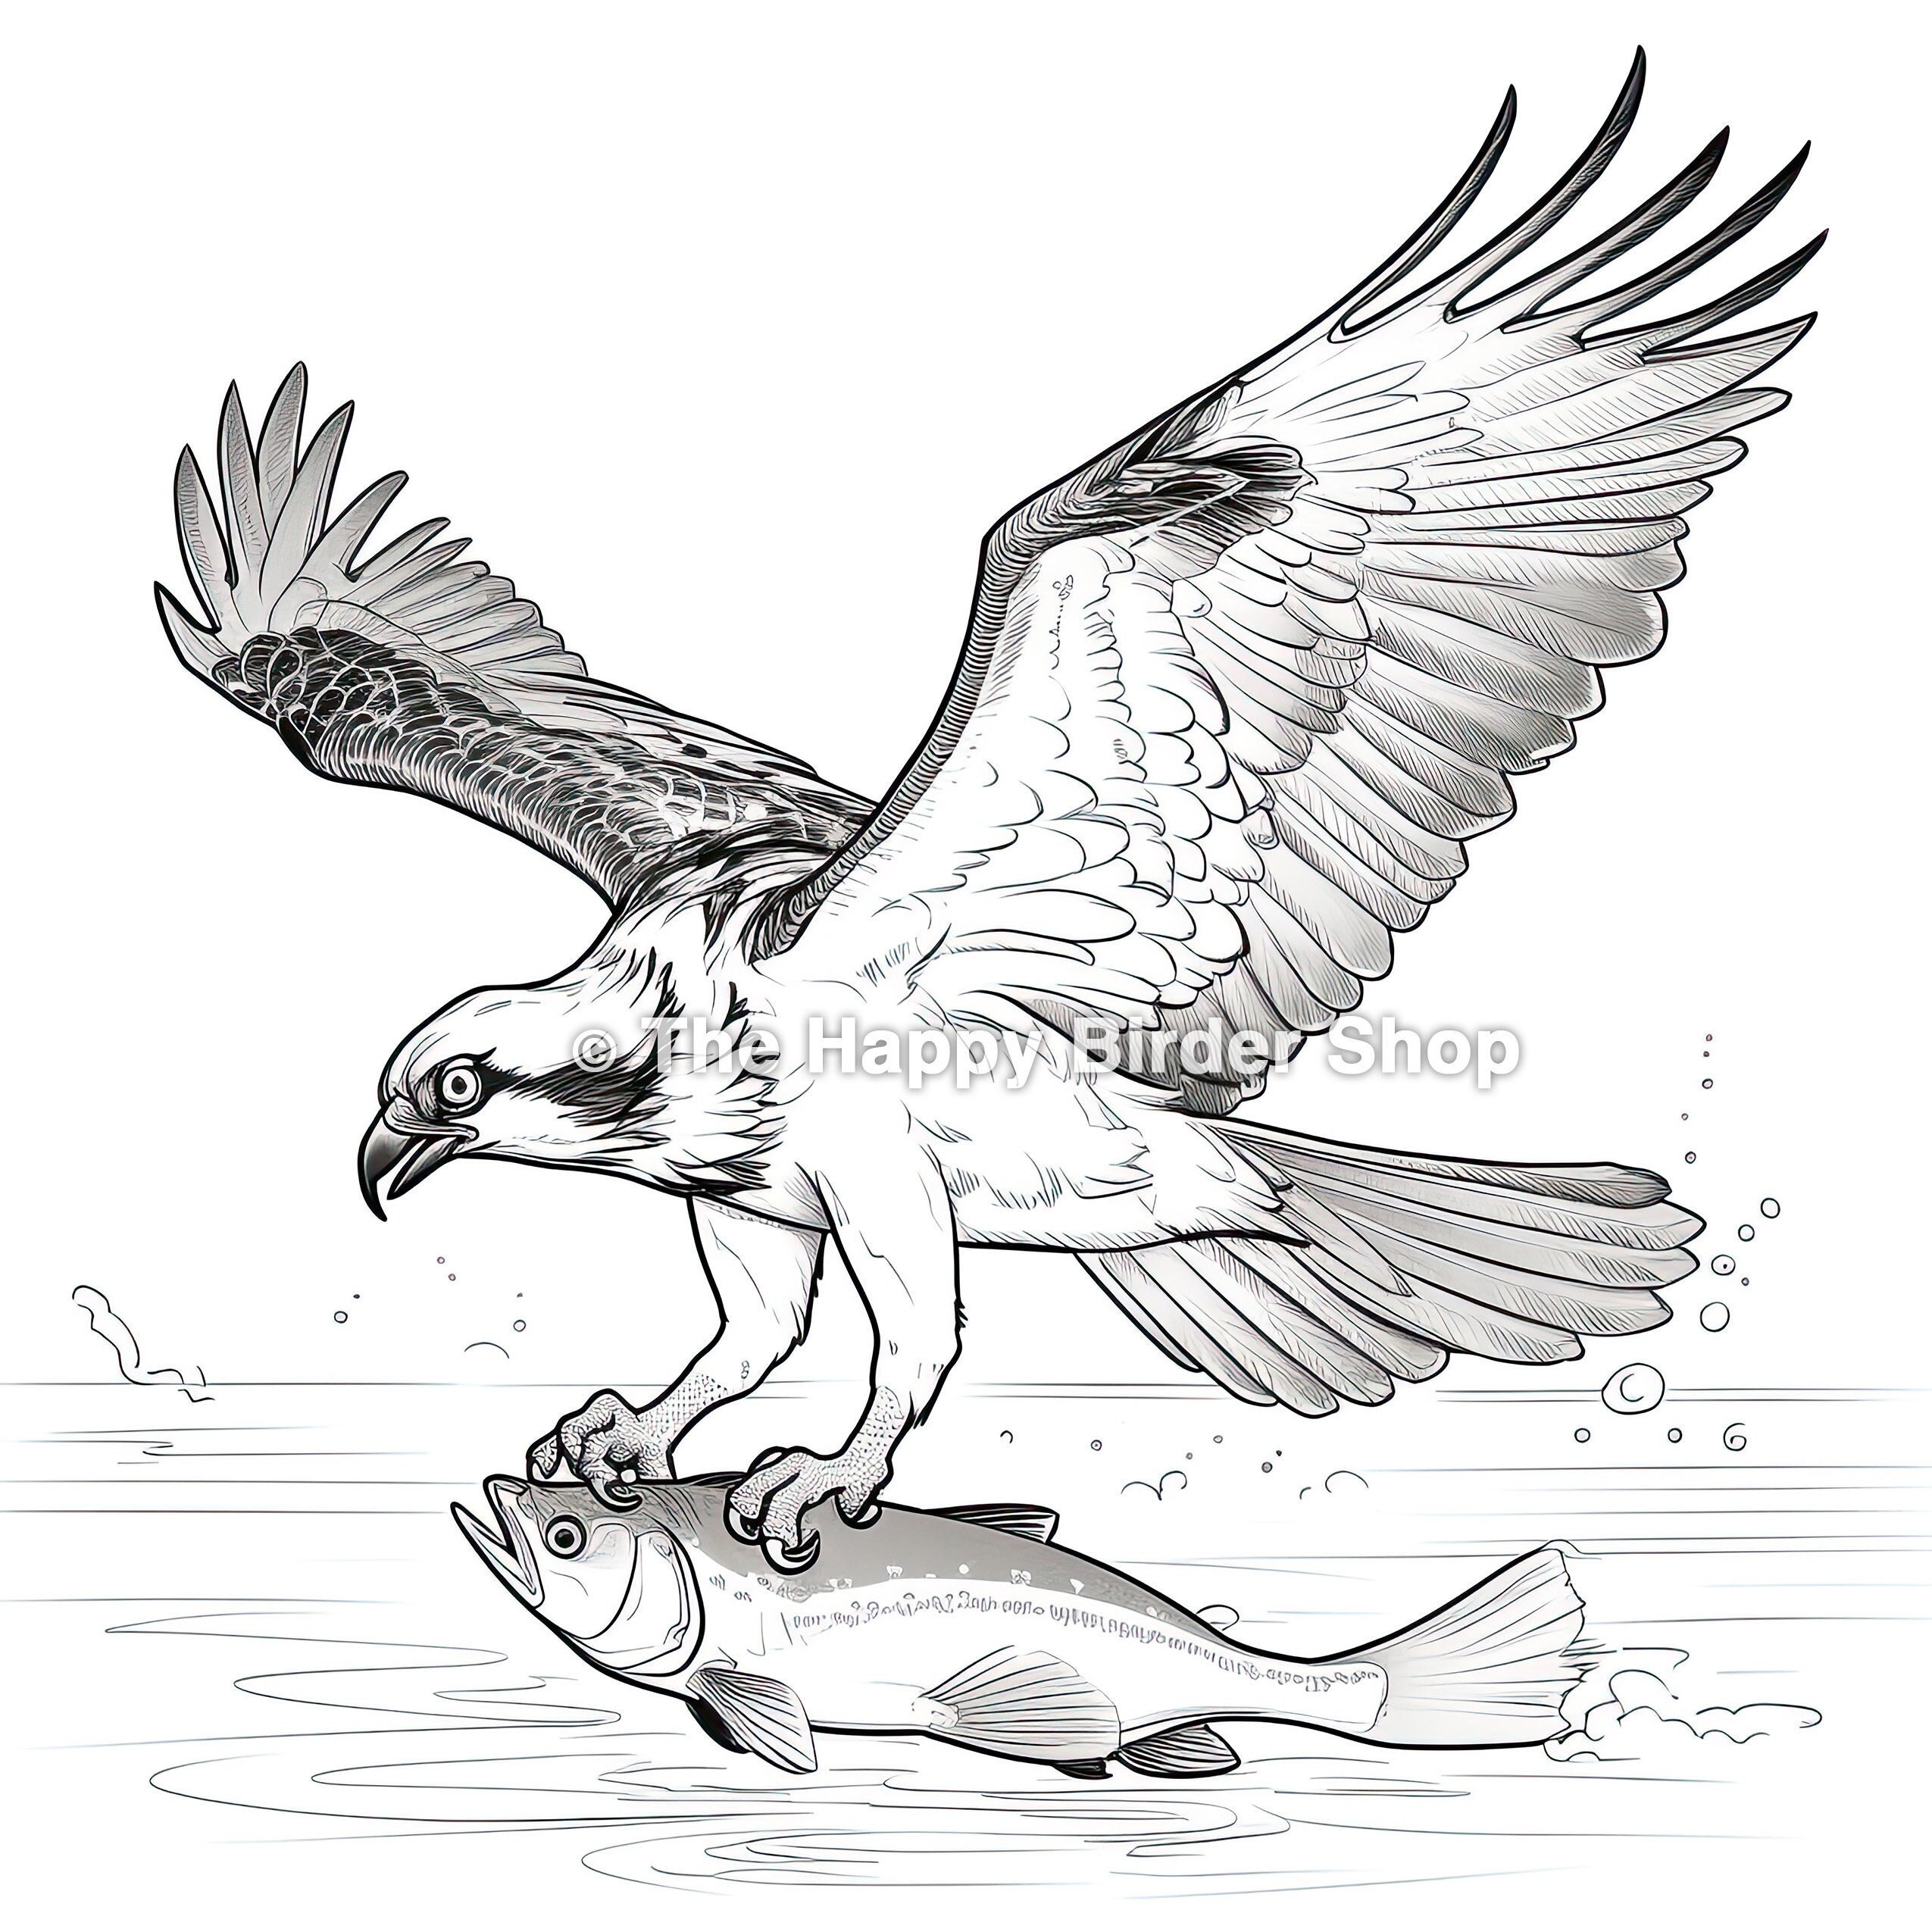 Osprey Coloring Book Page, Nature Coloring Book Page, Birds, Bird